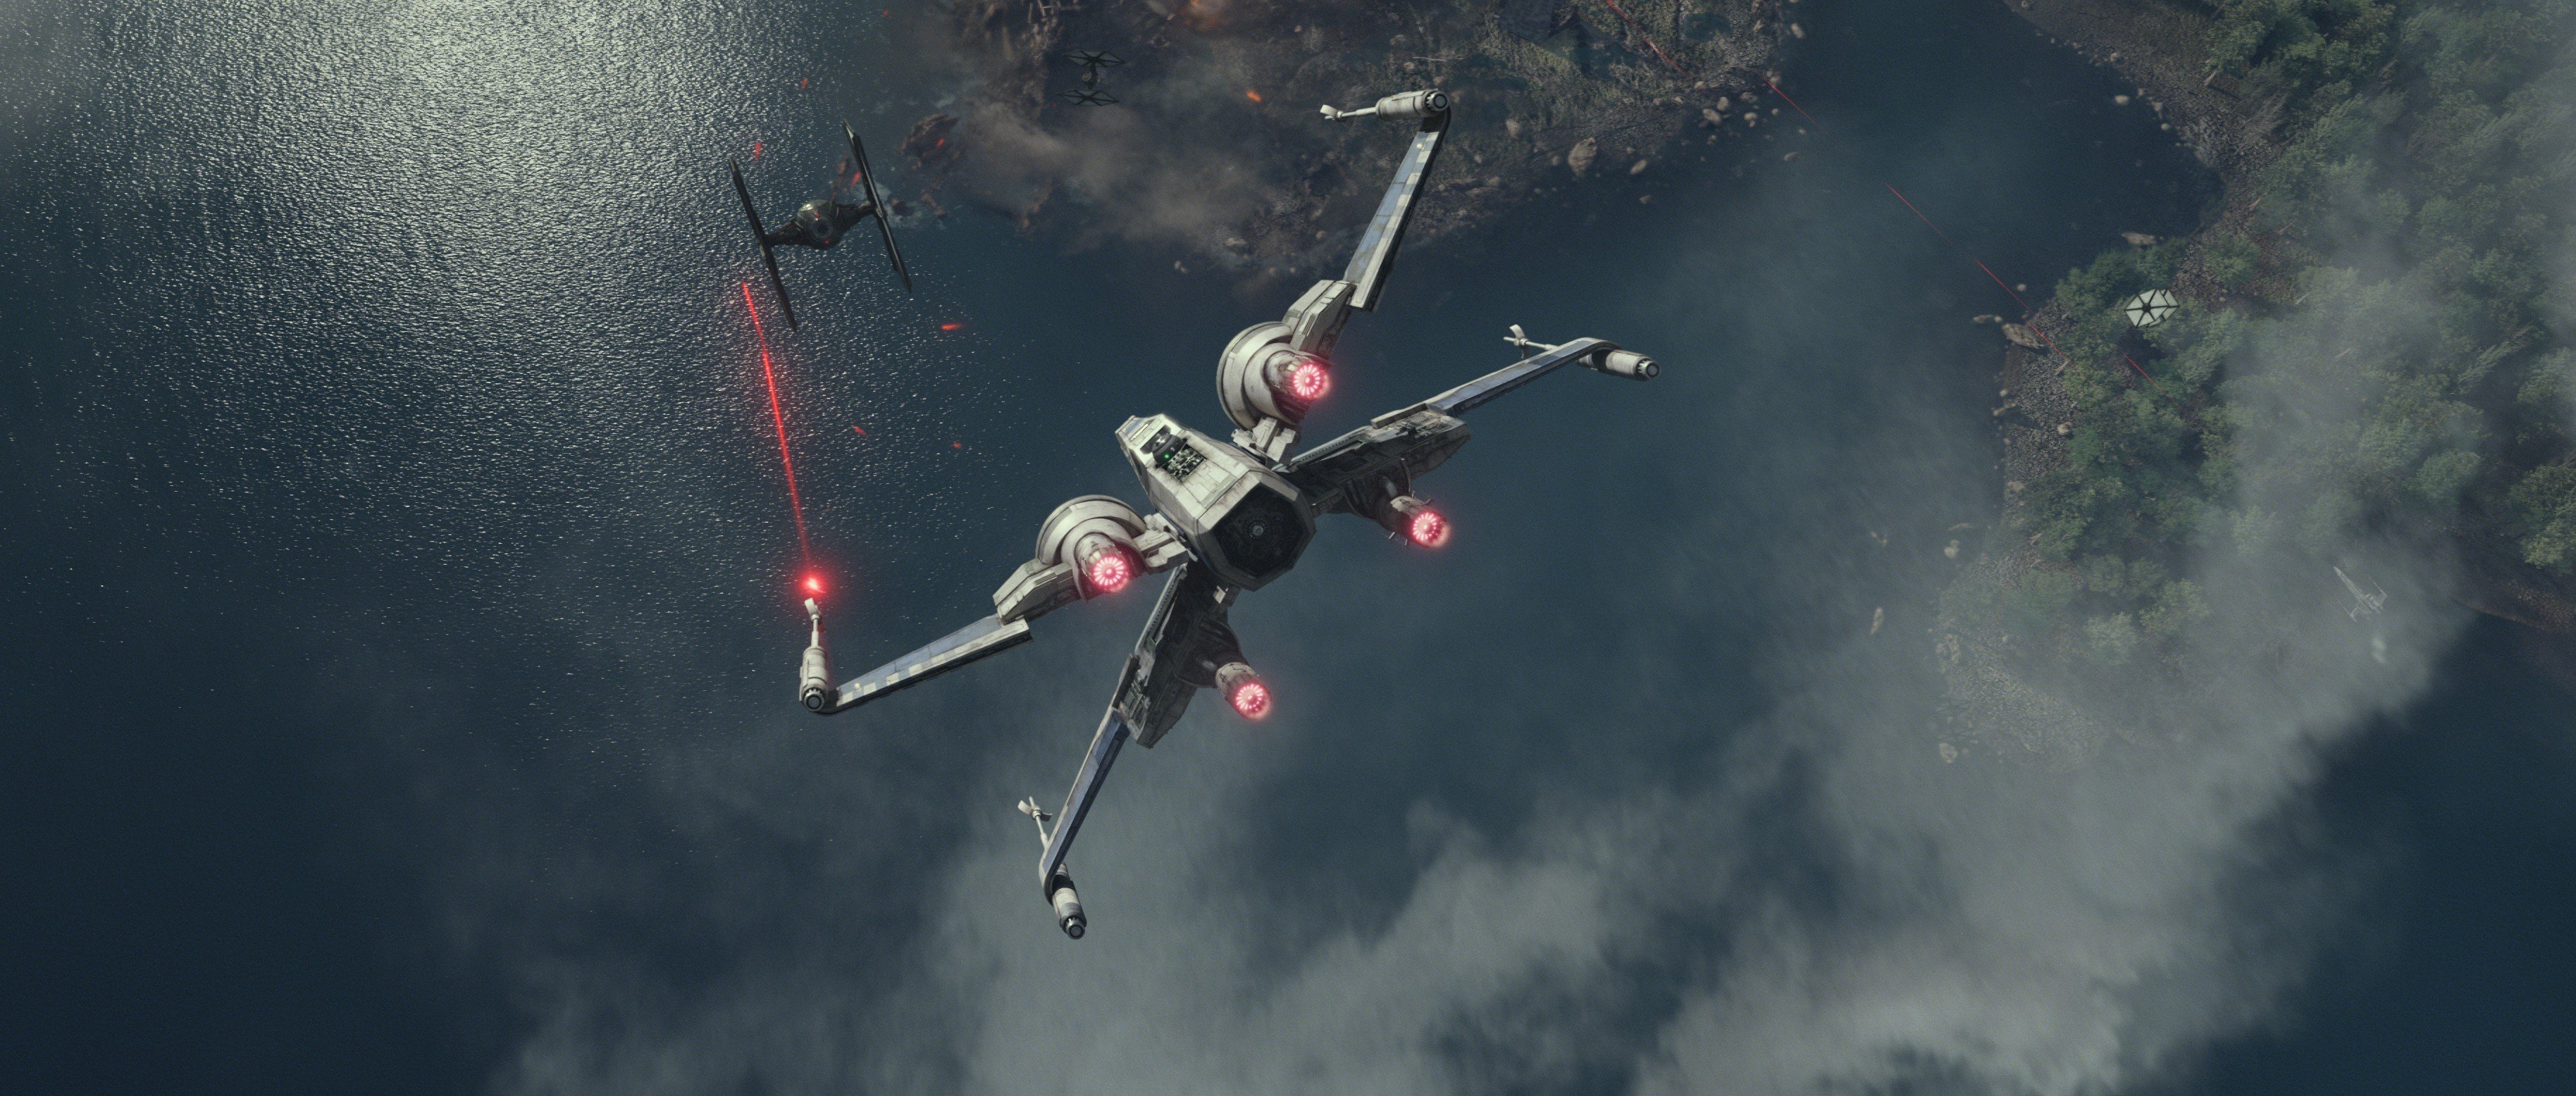 Star Wars: The Force Awakens, X wing, TIE Fighter, Movies Wallpaper